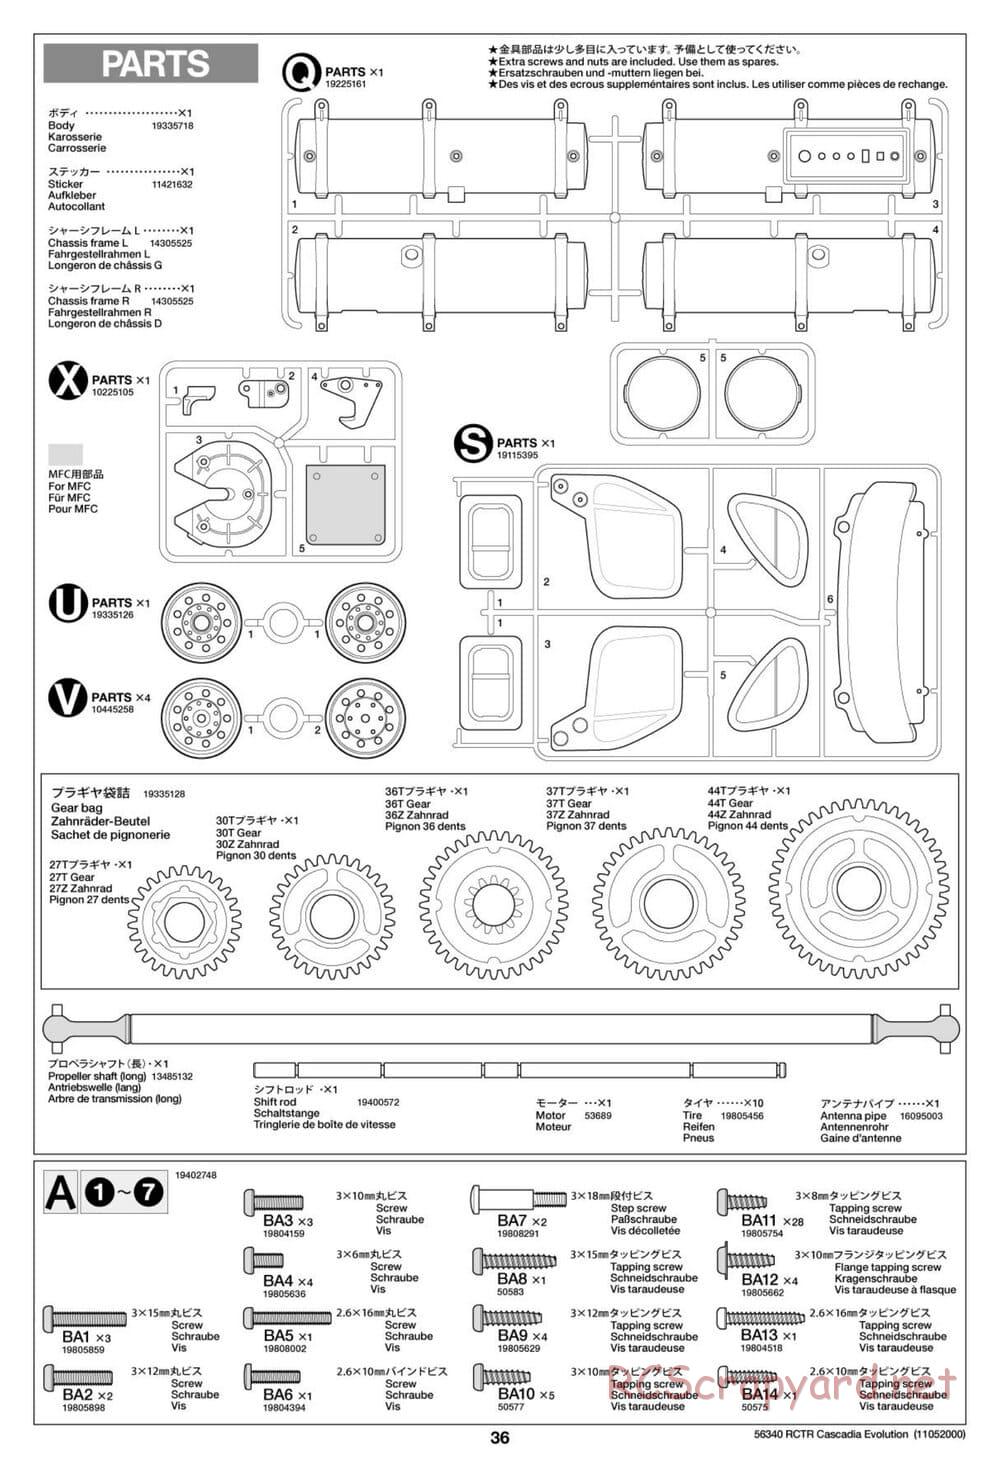 Tamiya - Freightliner Cascadia Evolution Tractor Truck Chassis - Manual - Page 36